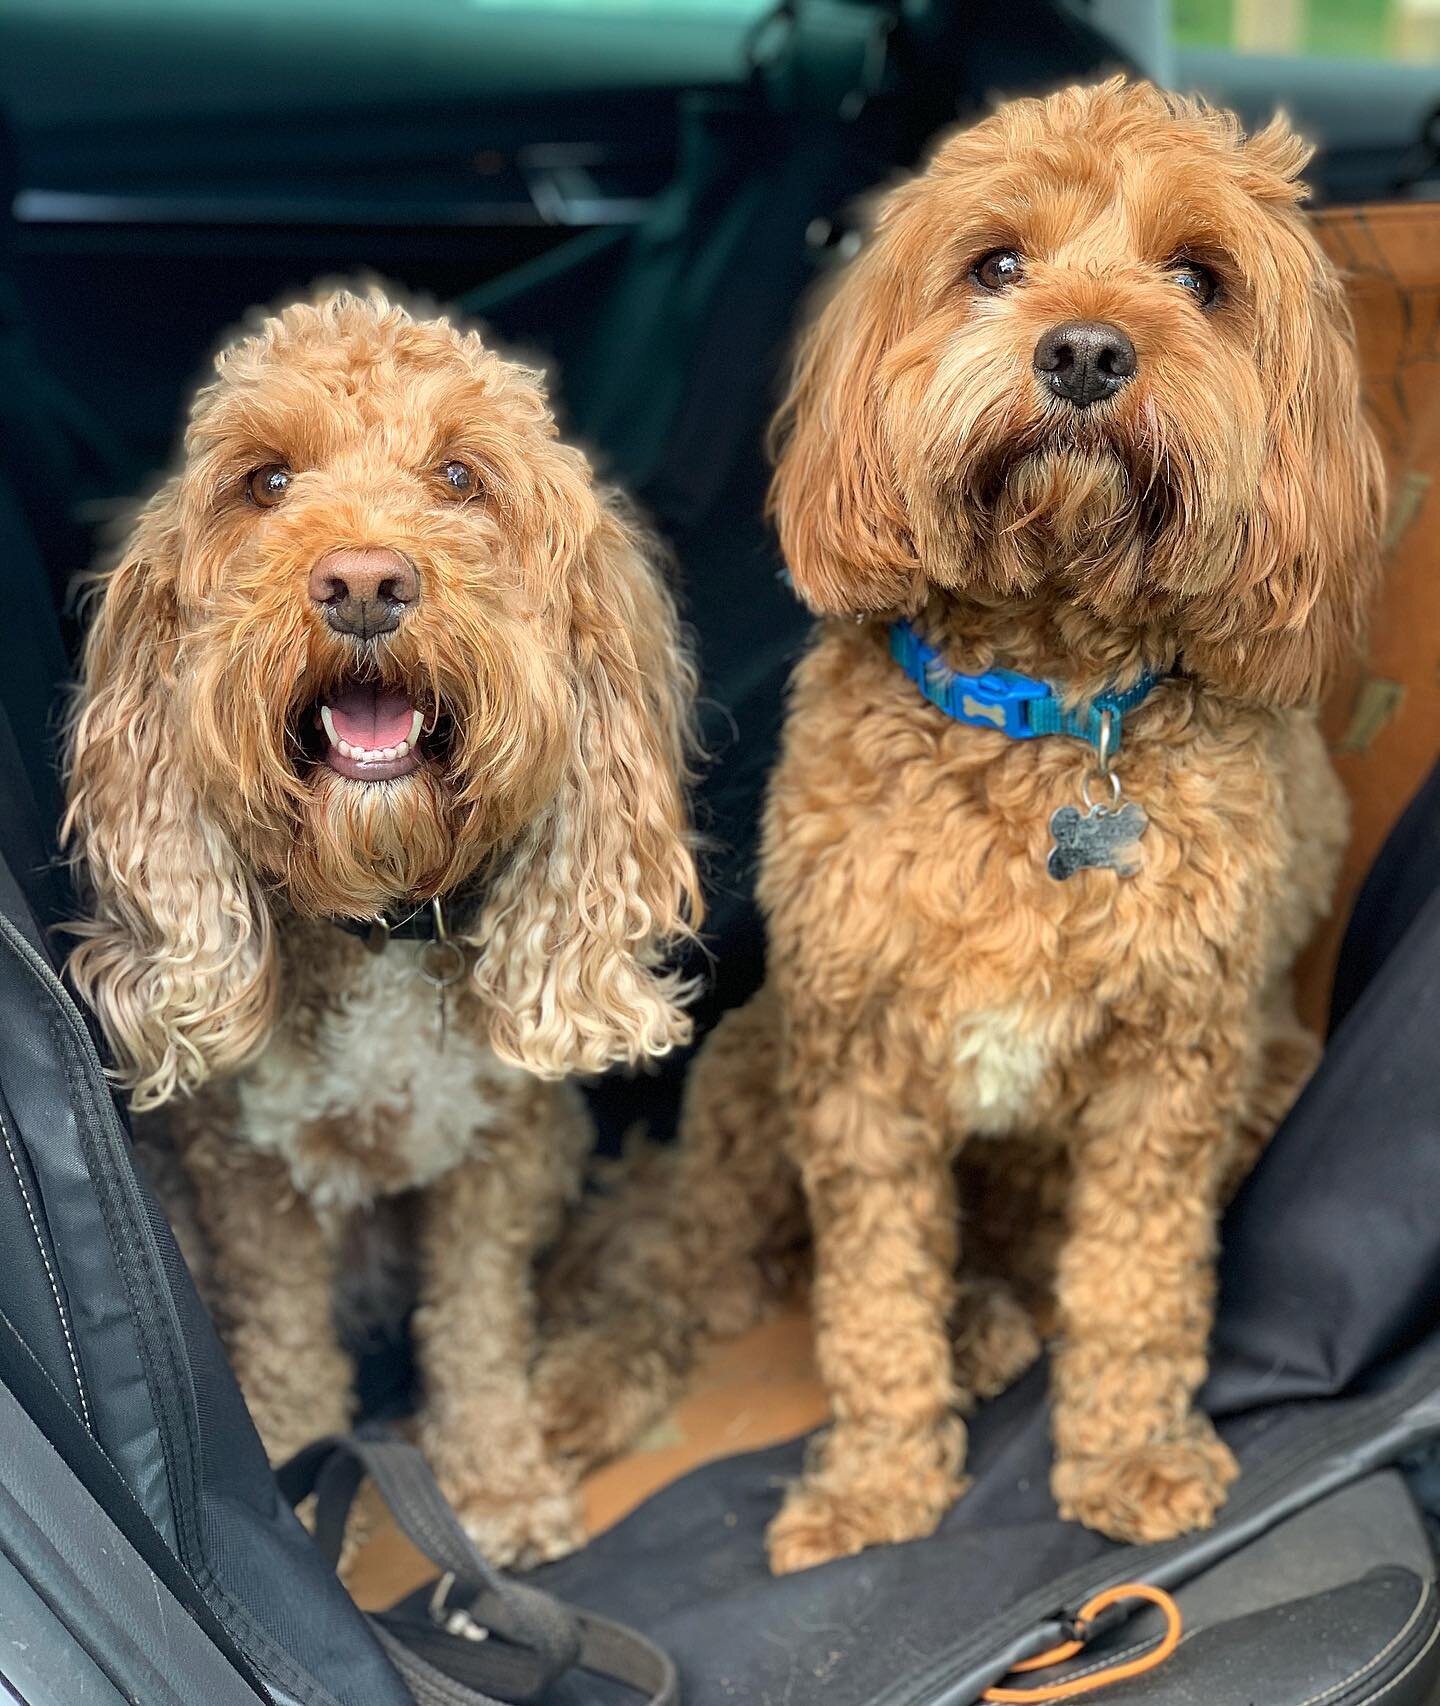 Thor&rsquo;s third wheeling days are over.. he&rsquo;s coupled up with Ella and is feeling pretty pleased with himself 🐶💕🐶 
-
#puppylove #couplegoals #younglove #puppers #doggos #cockapoo #cavapoo #cuties #dogsofinstagram #dog #dogwalker #love #do